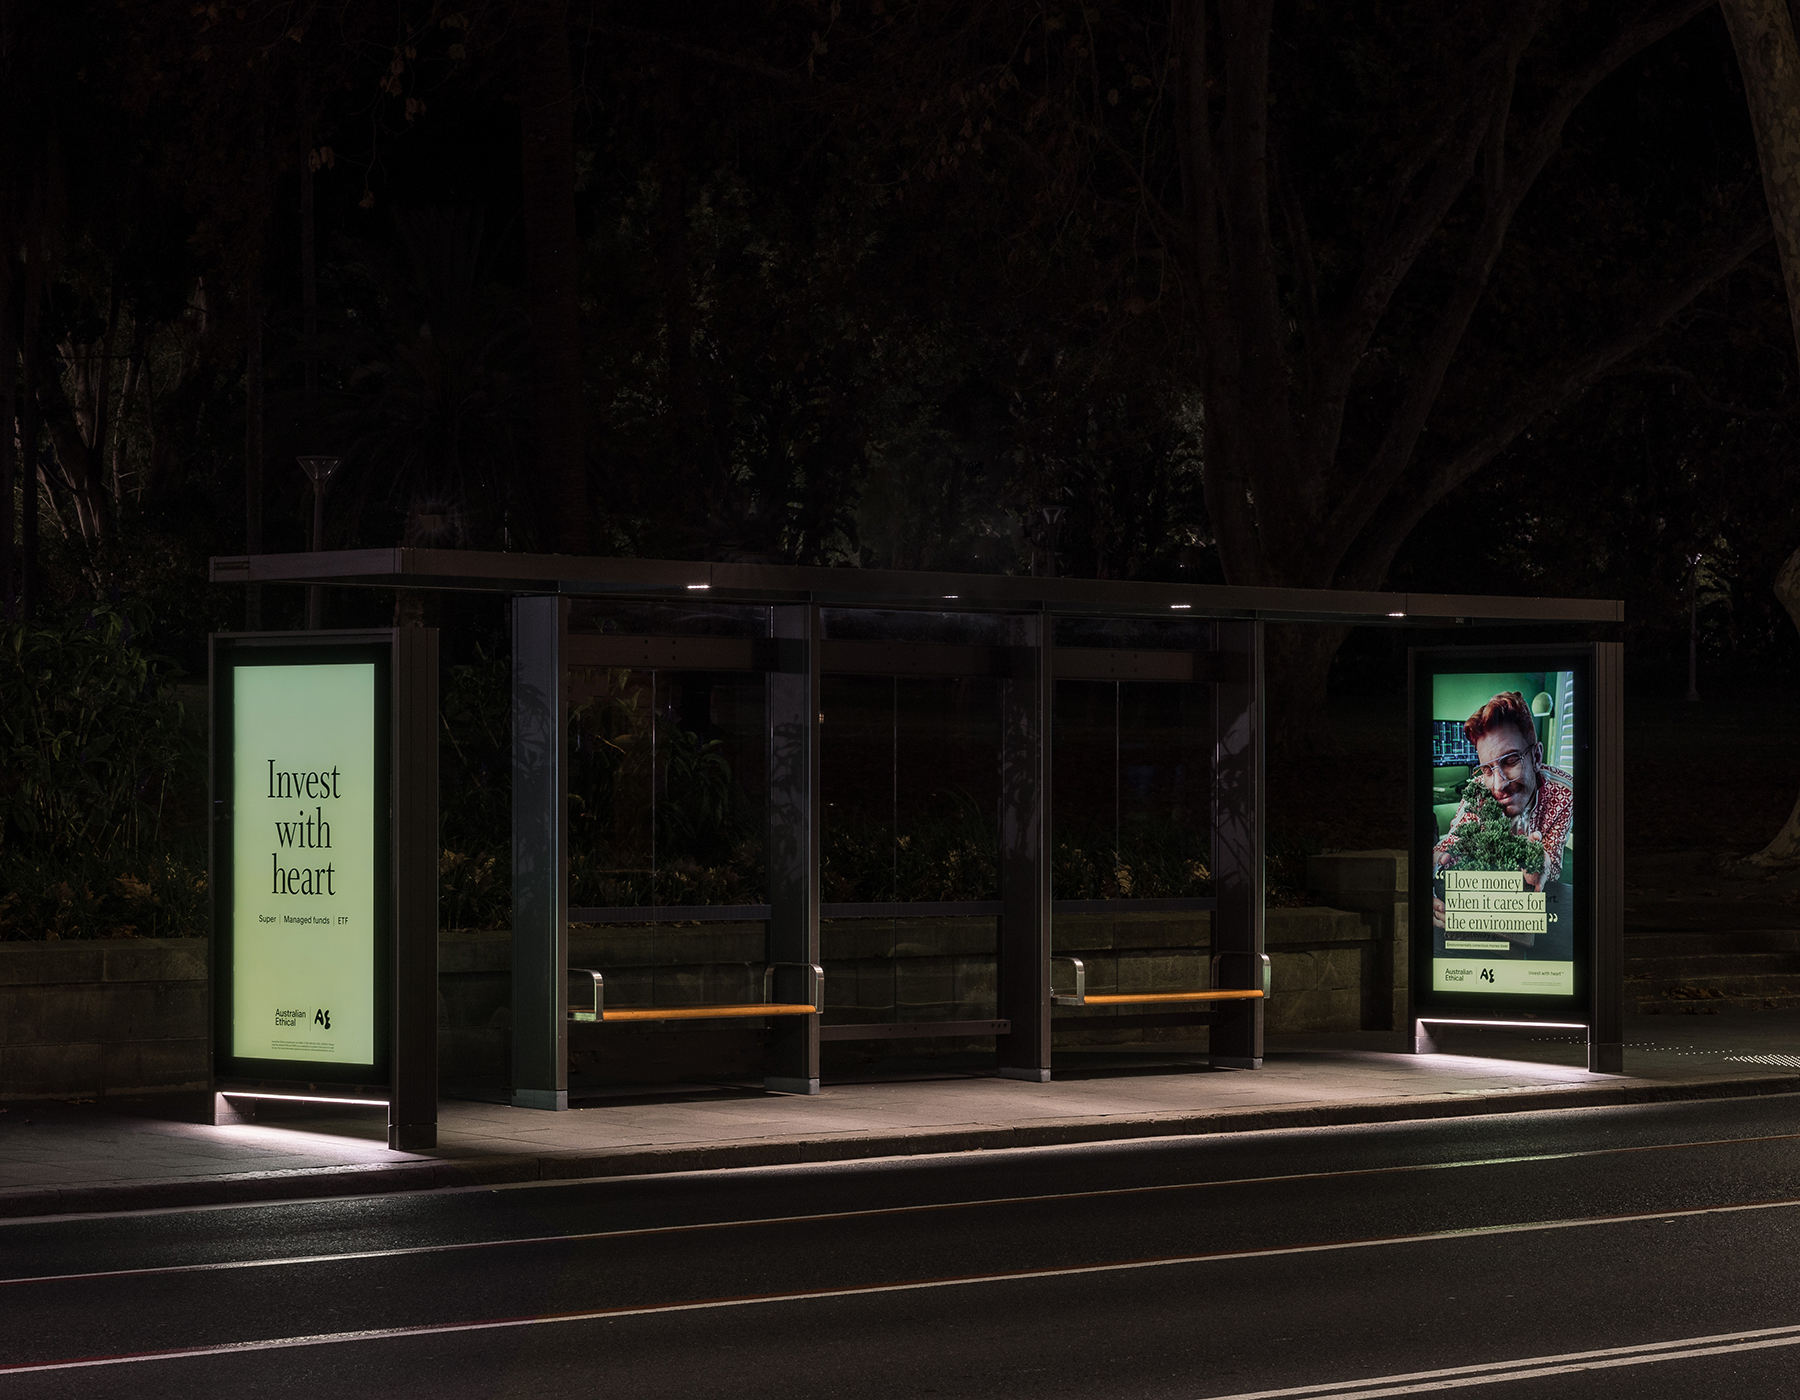 Sydney Bus Shelters featuring iGuzzini LaserBlade supplied by Studio 100 JBW